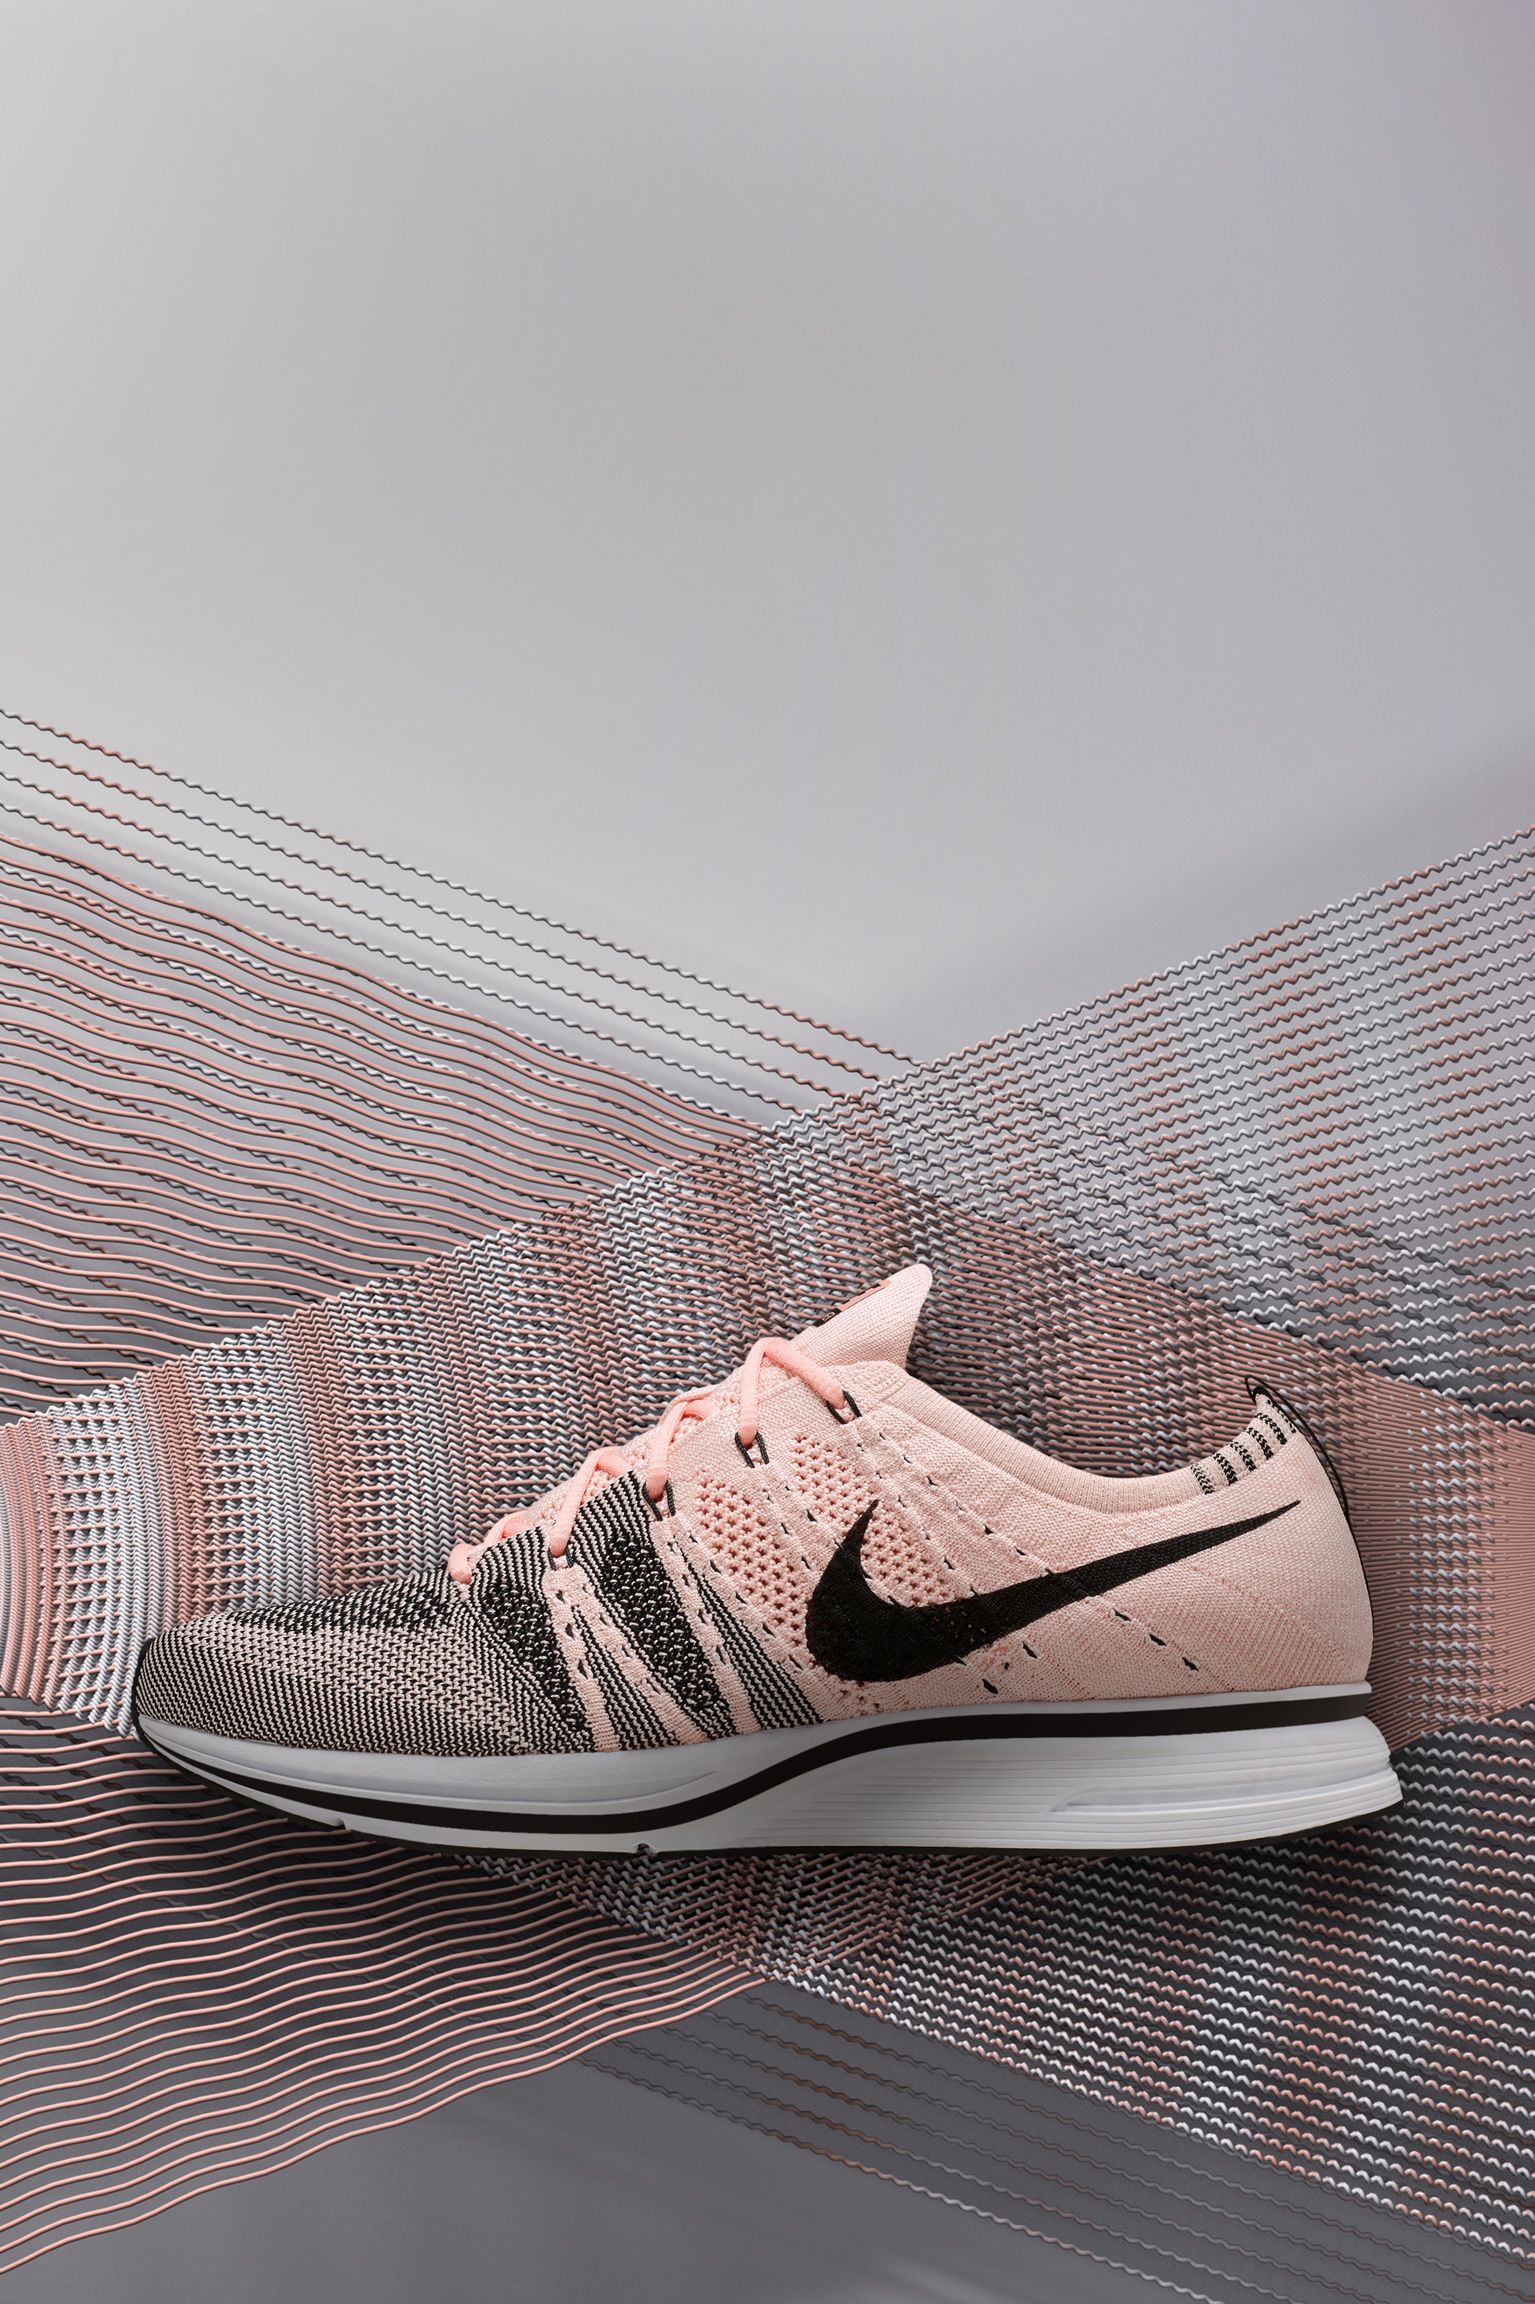 flaco amante calibre Nike Flyknit Trainer 'Sunset Tint'. Nike SNKRS SE